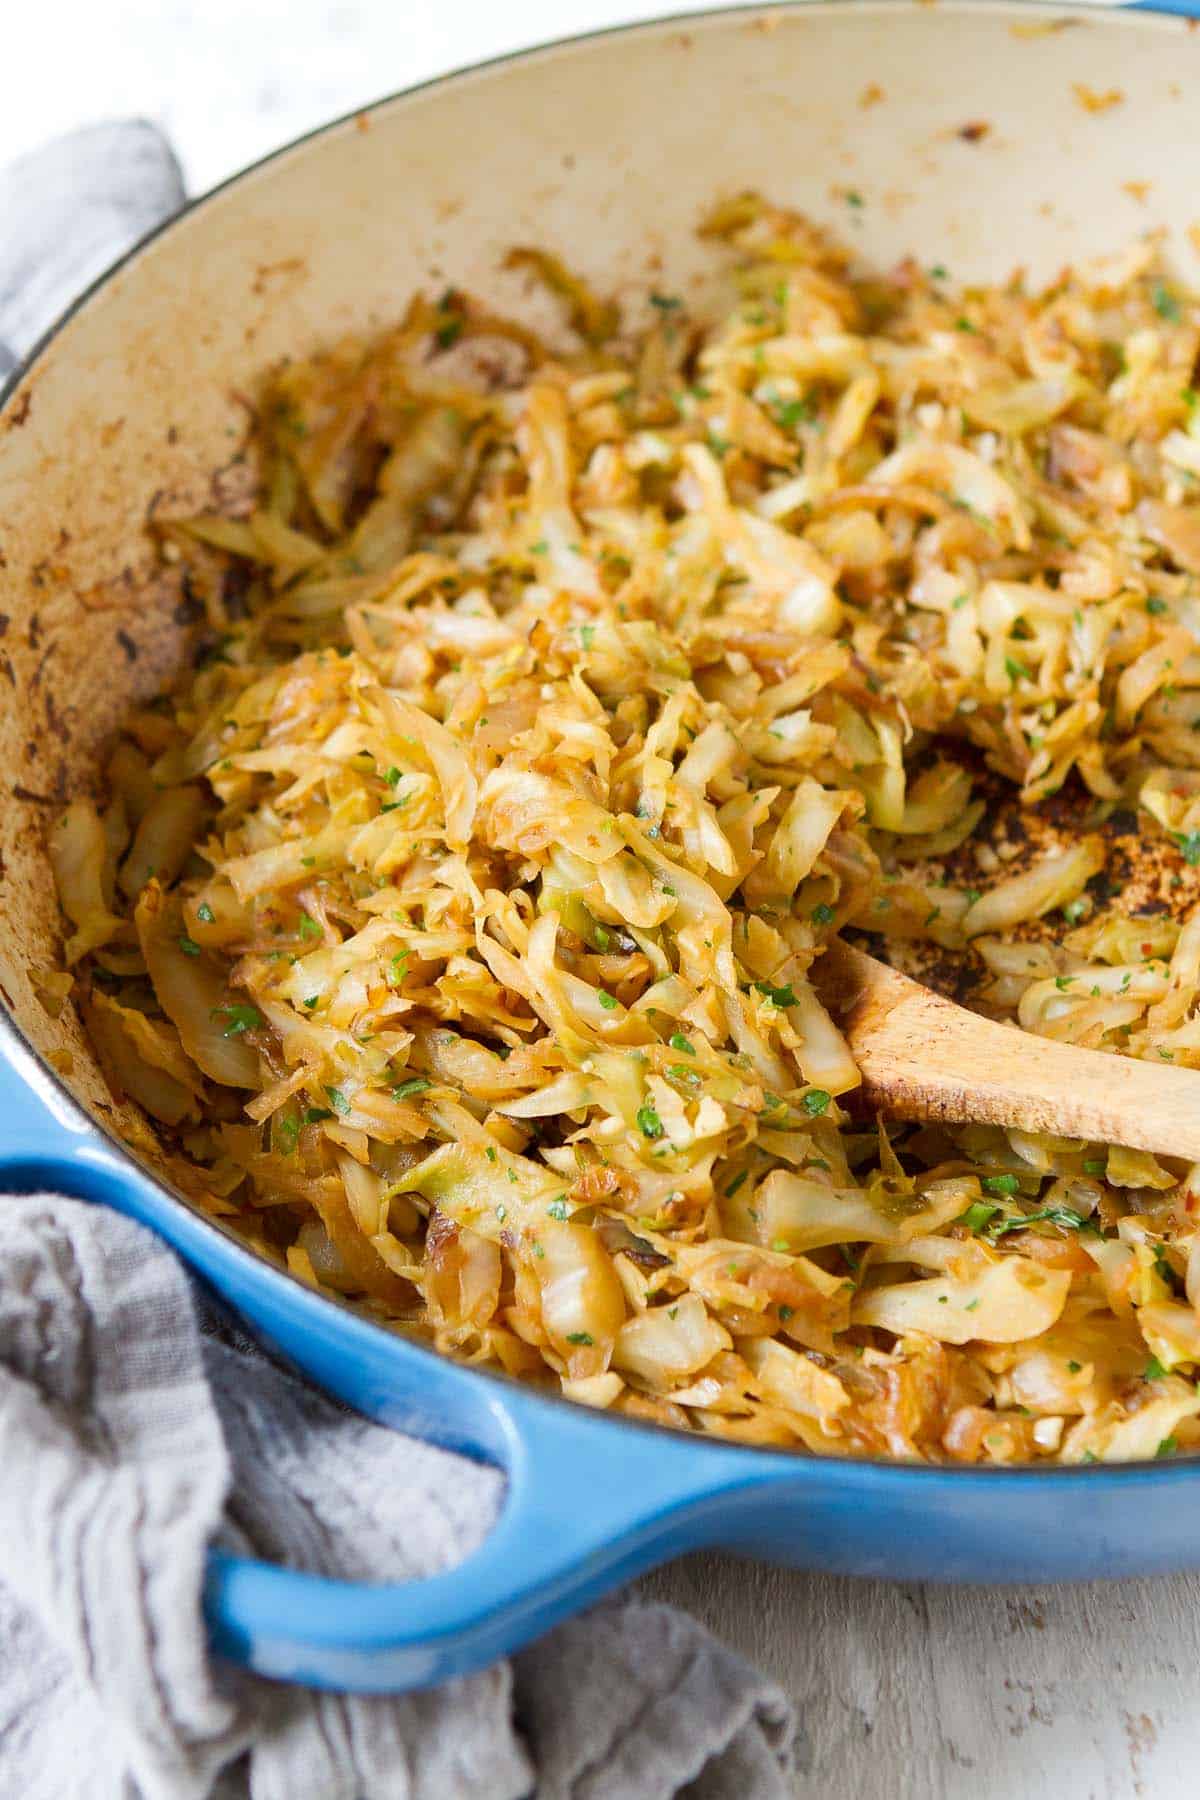 Caramelized cabbage and onions in a large blue braiser pan.